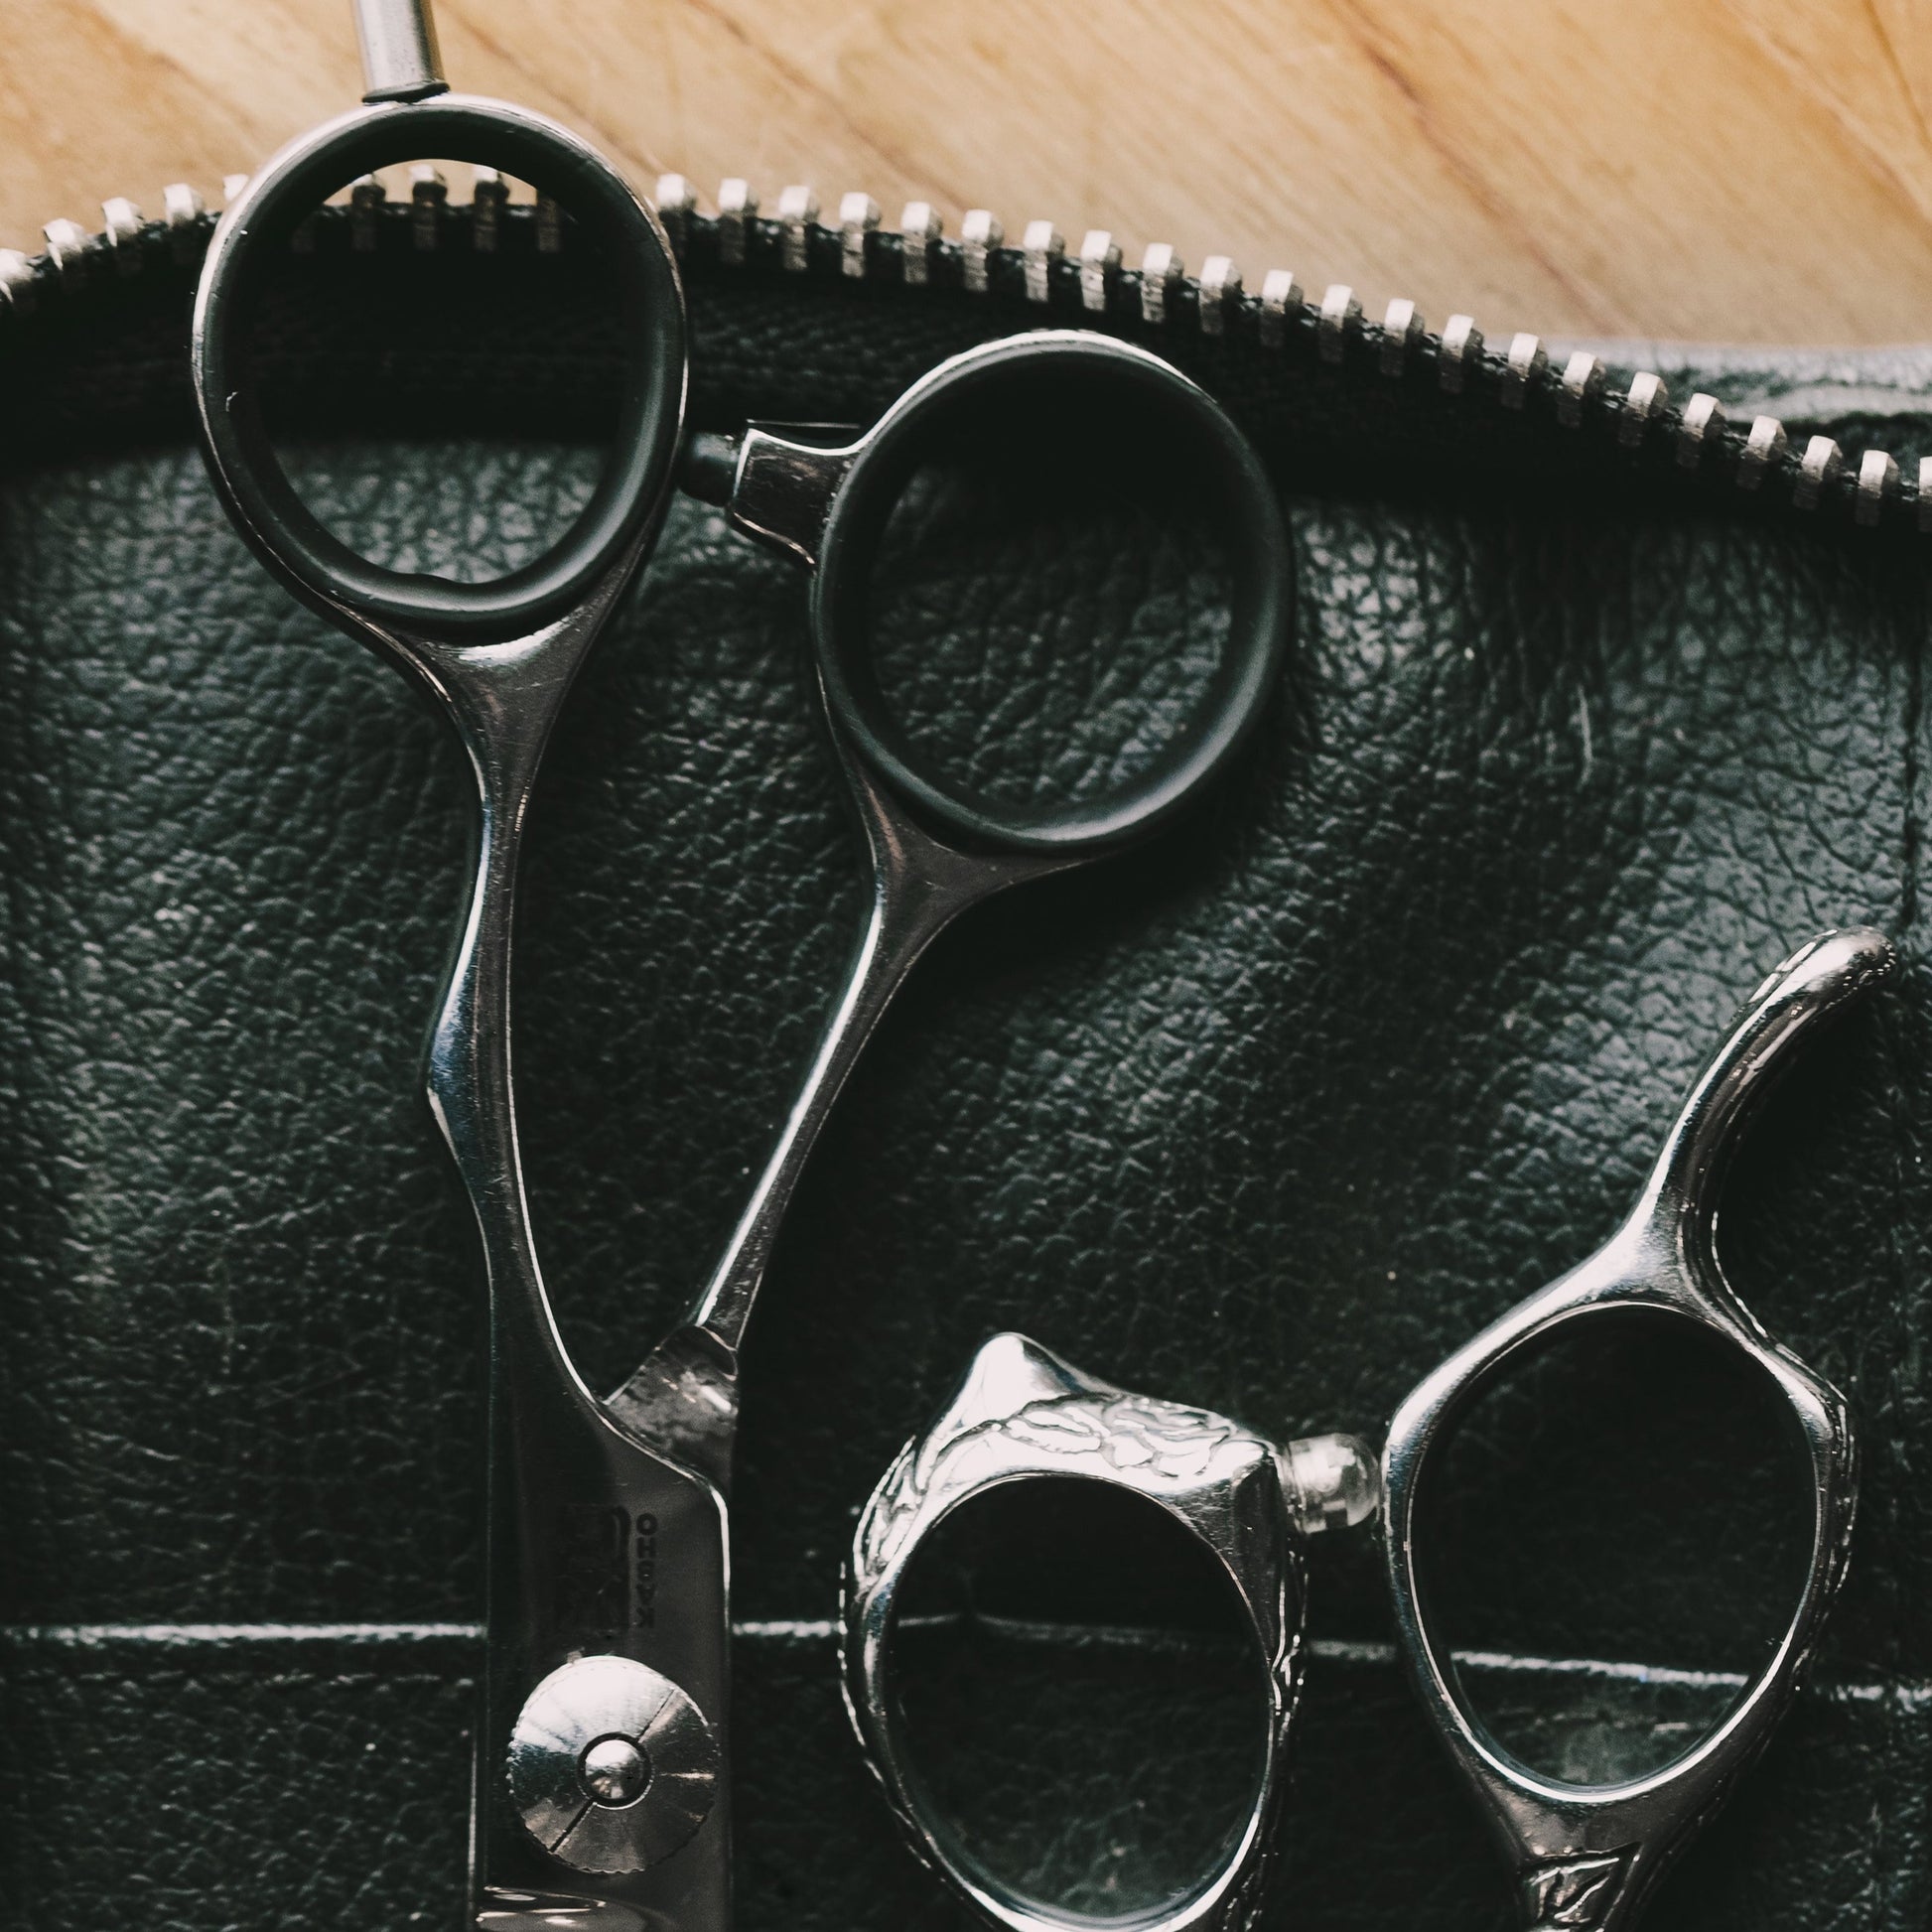 A Hairdressers tools in a leather case showing scissors and thinning tools.